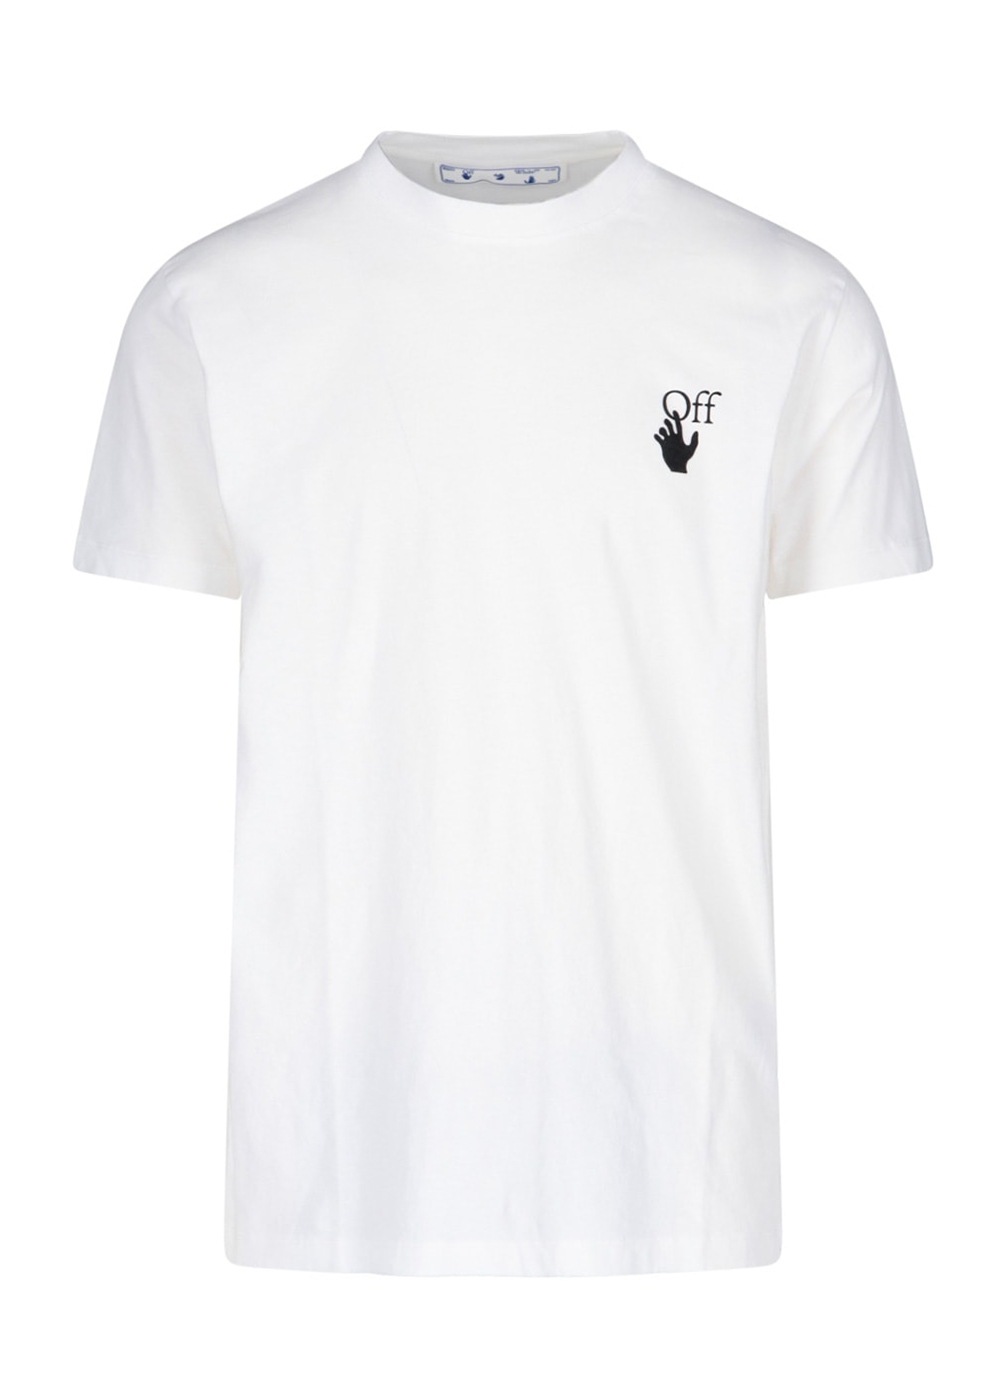 Off-White Slim Fit Caravaggio The Lute Player T-Shirt White